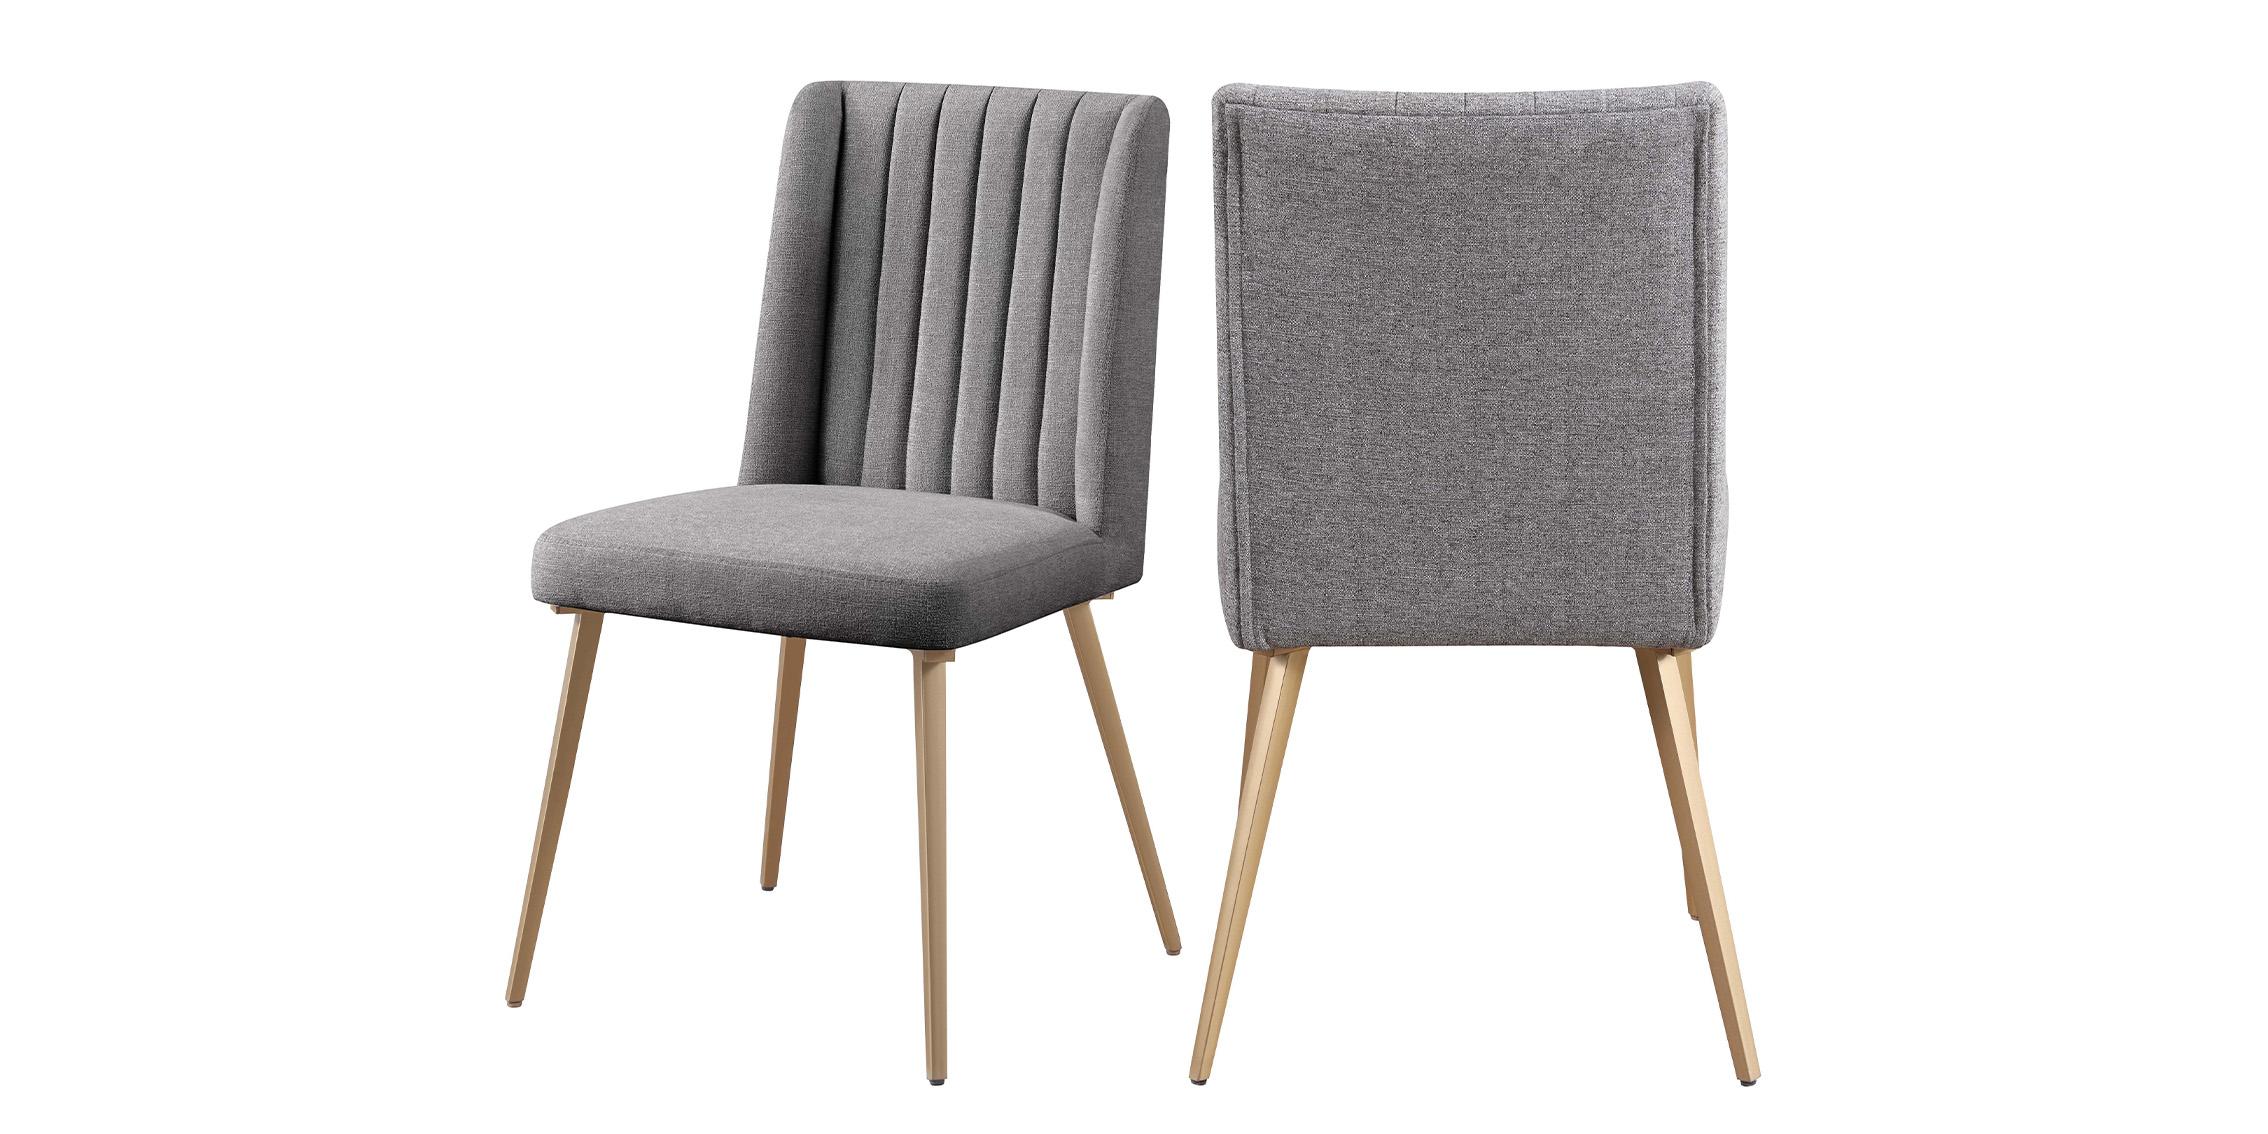 Contemporary, Modern Dining Chair Set ELEANOR 932Grey-C 932Grey-C in Gray, Gold Fabric